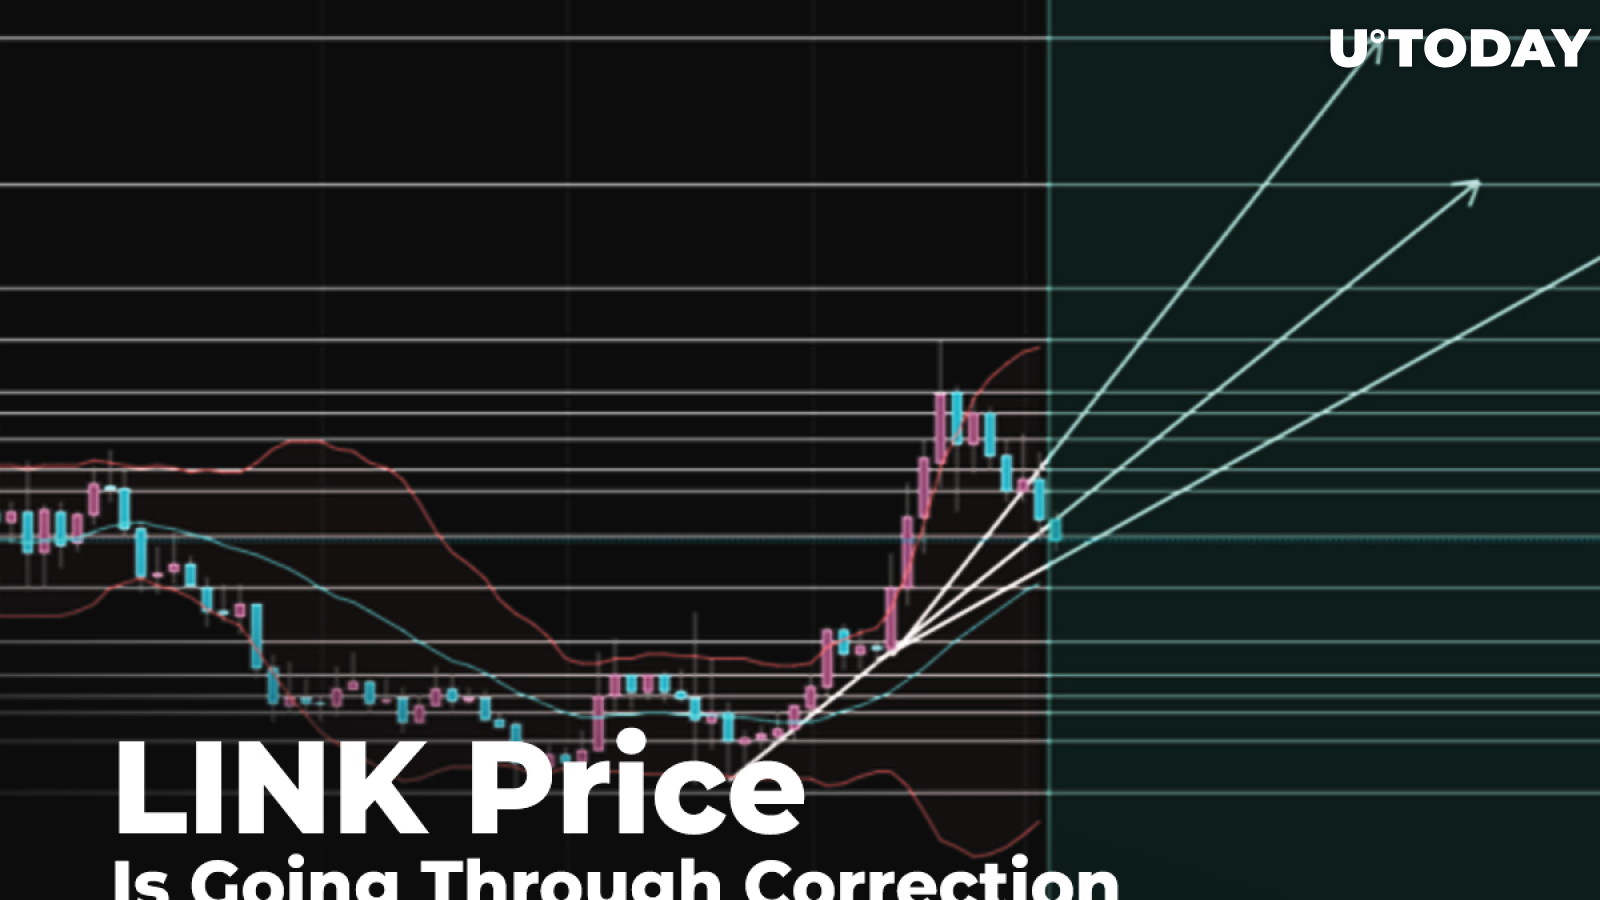 LINK Price Is Going Through Correction: Traders Expect $2.1 Level Before Another Spike